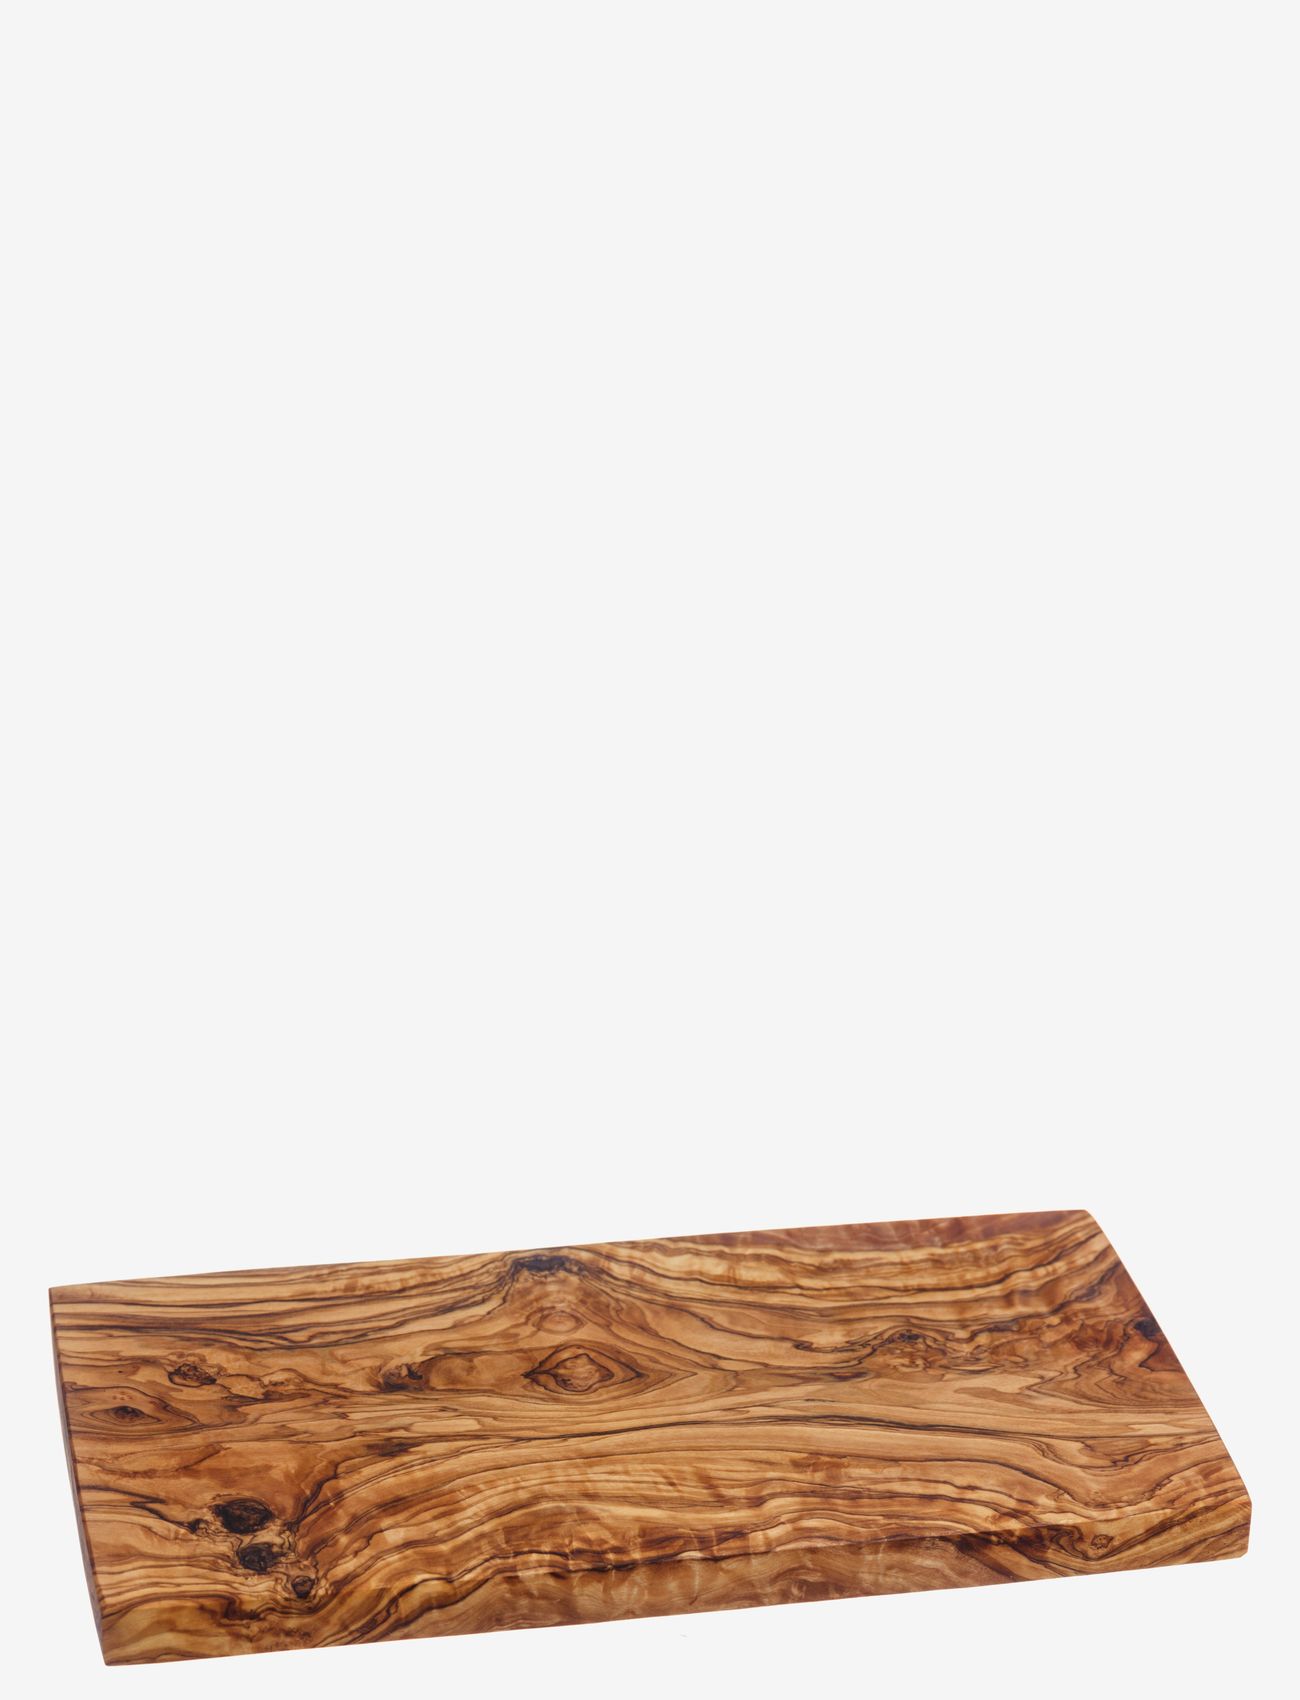 naturally med - Chopping board rectangle - brown - 0